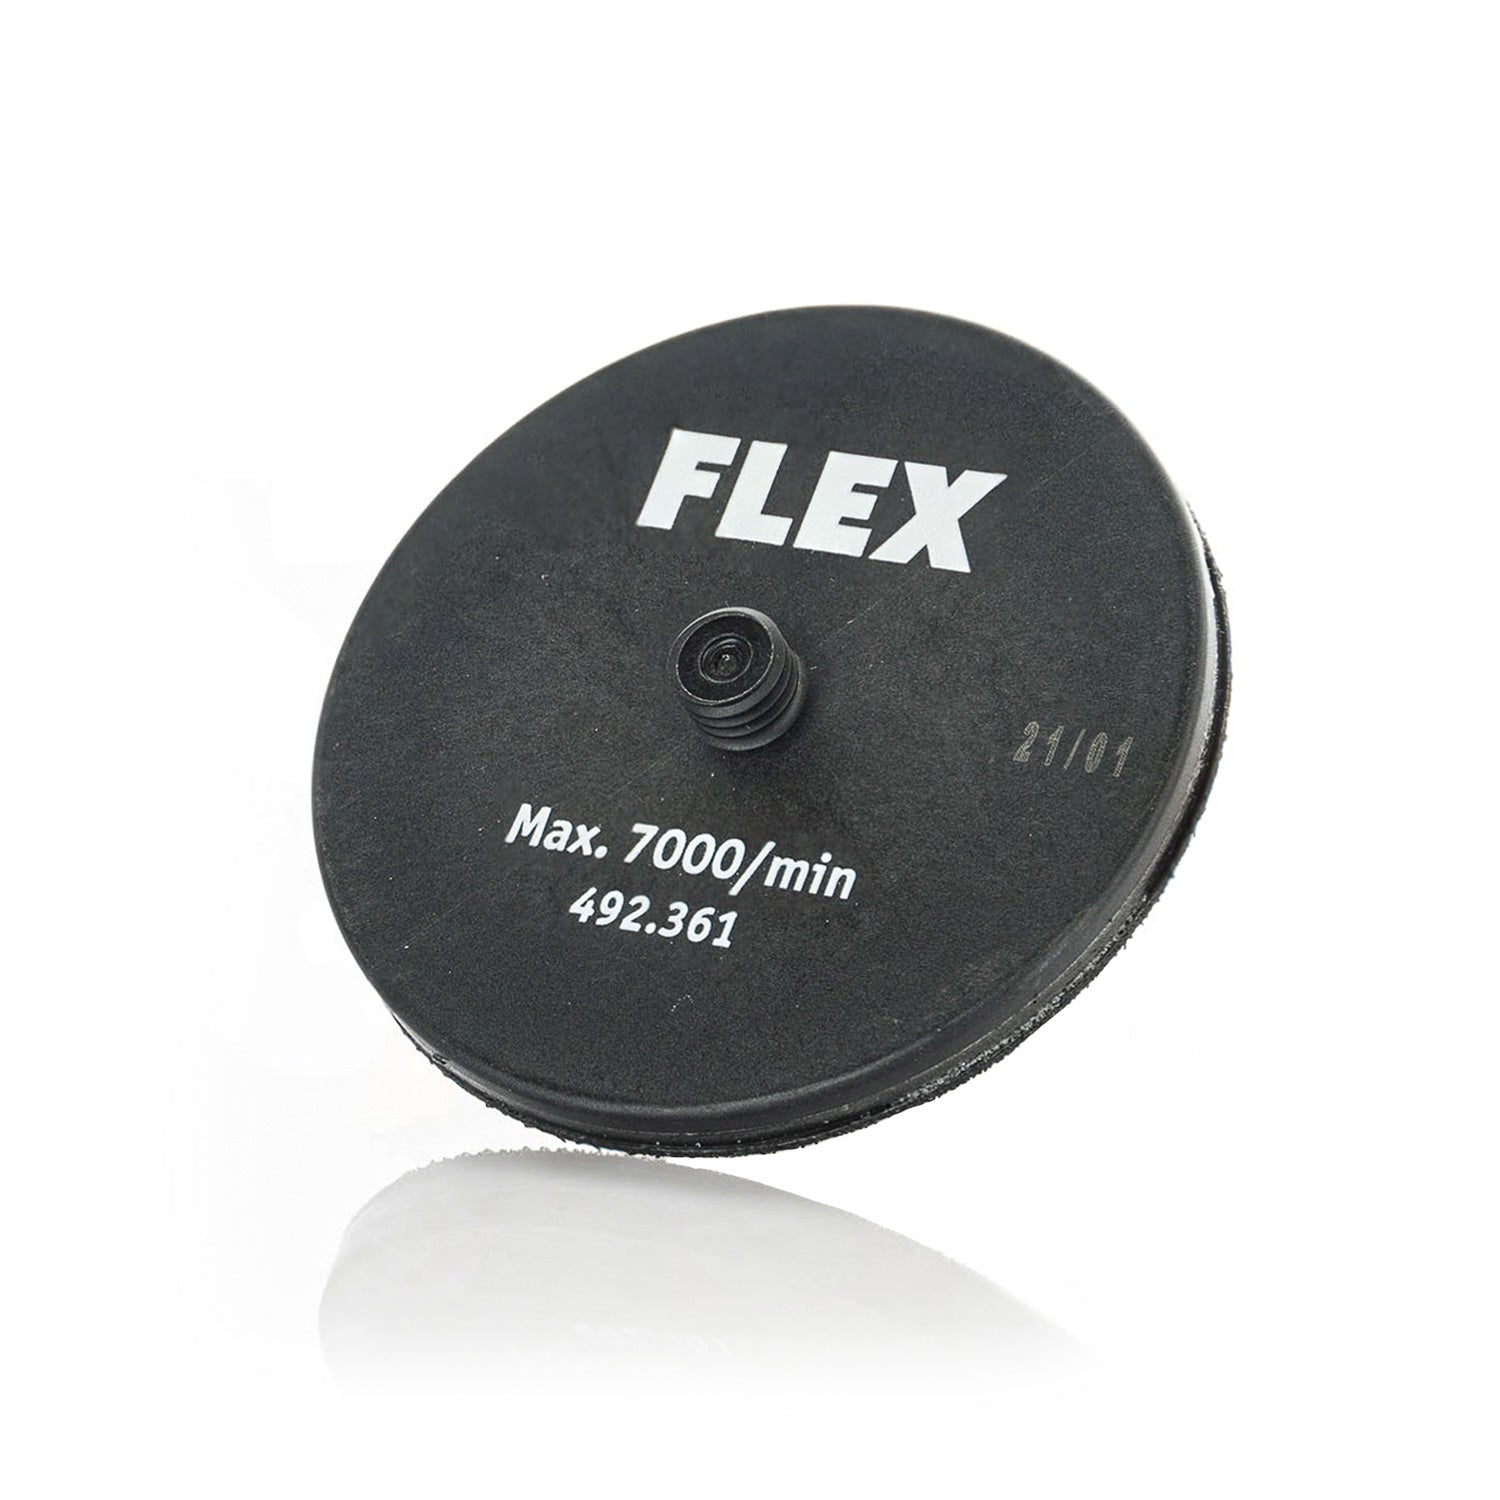 flex-pxe80-3-inch-velcro-backing-plate